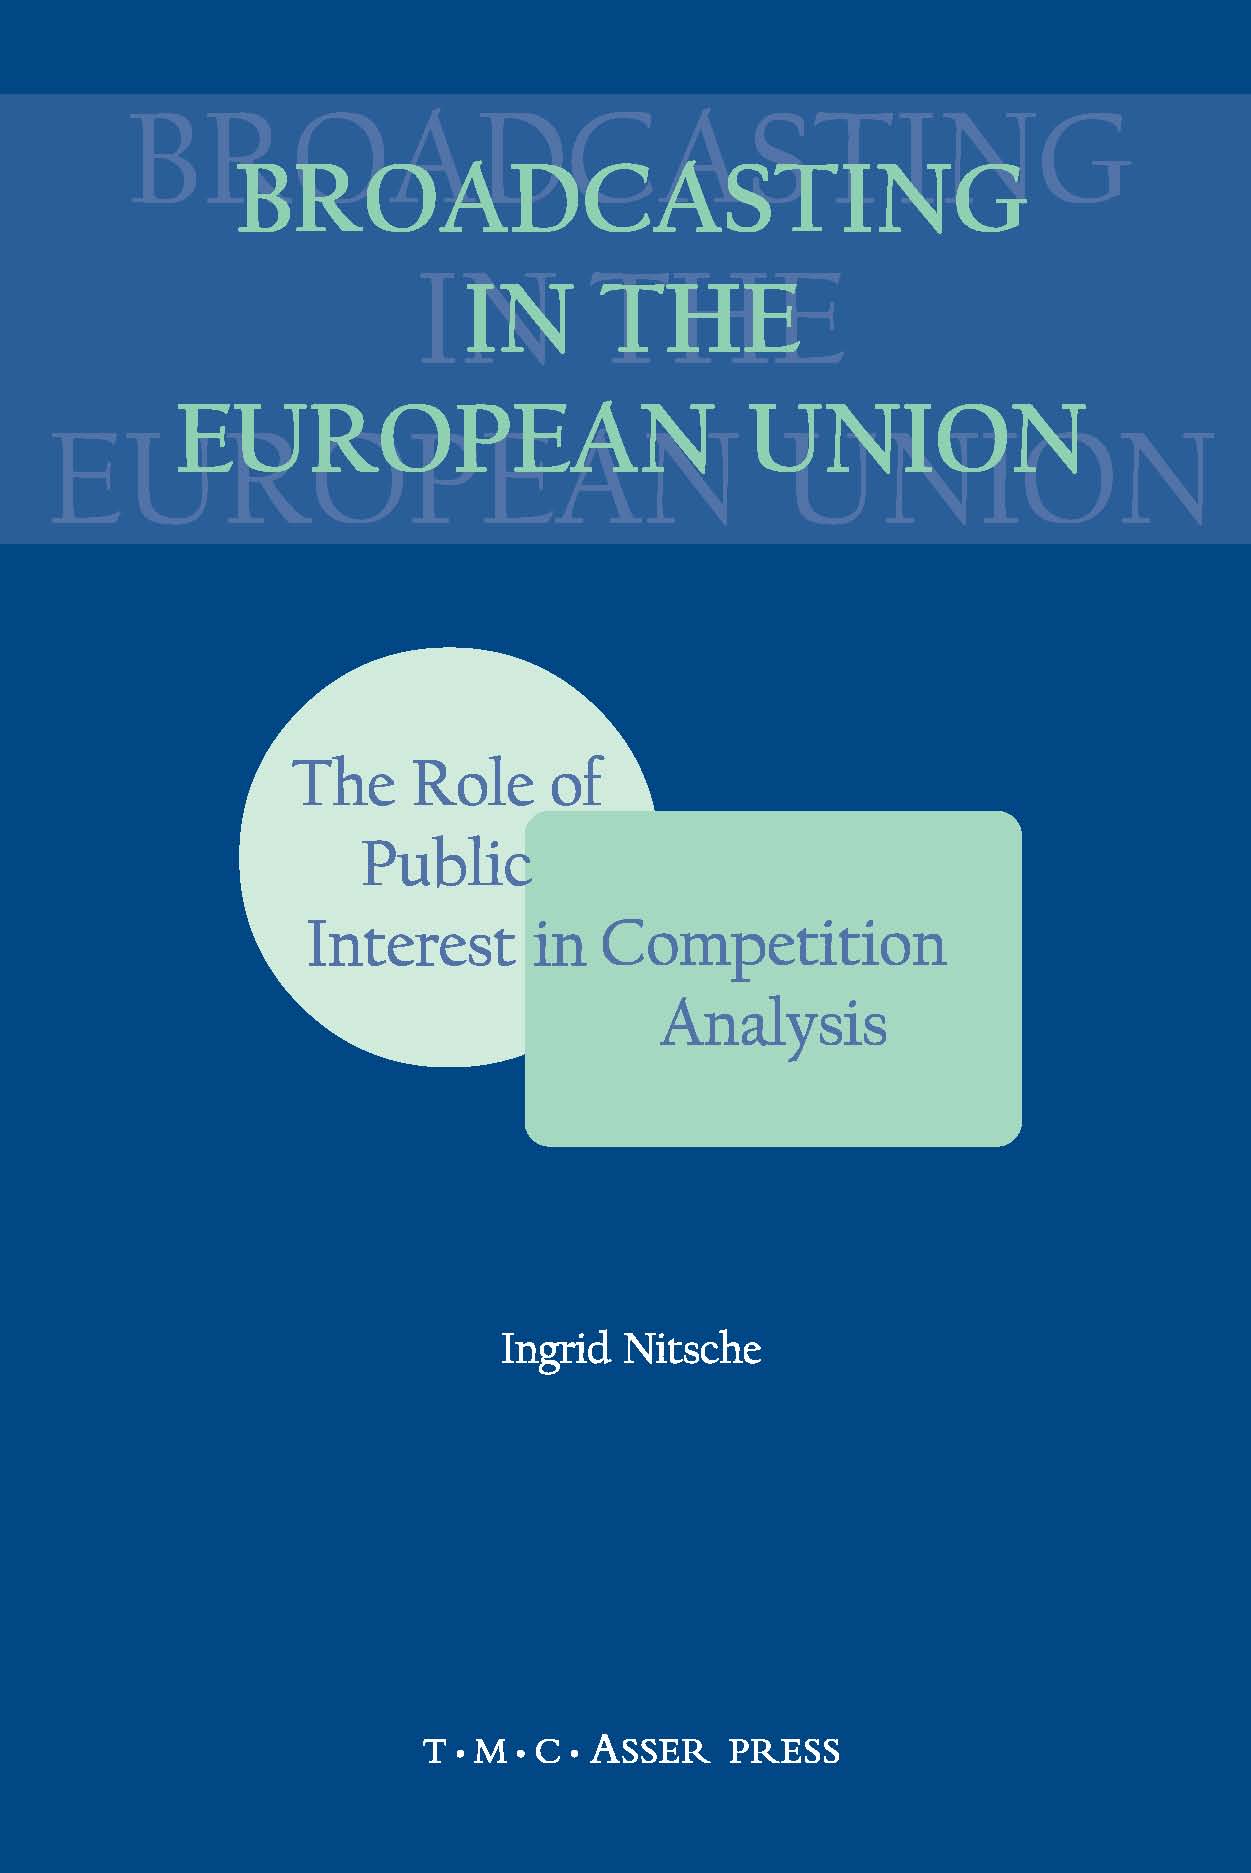 Broadcasting in the European Union - The Role of Public Interest in Competition Analysis